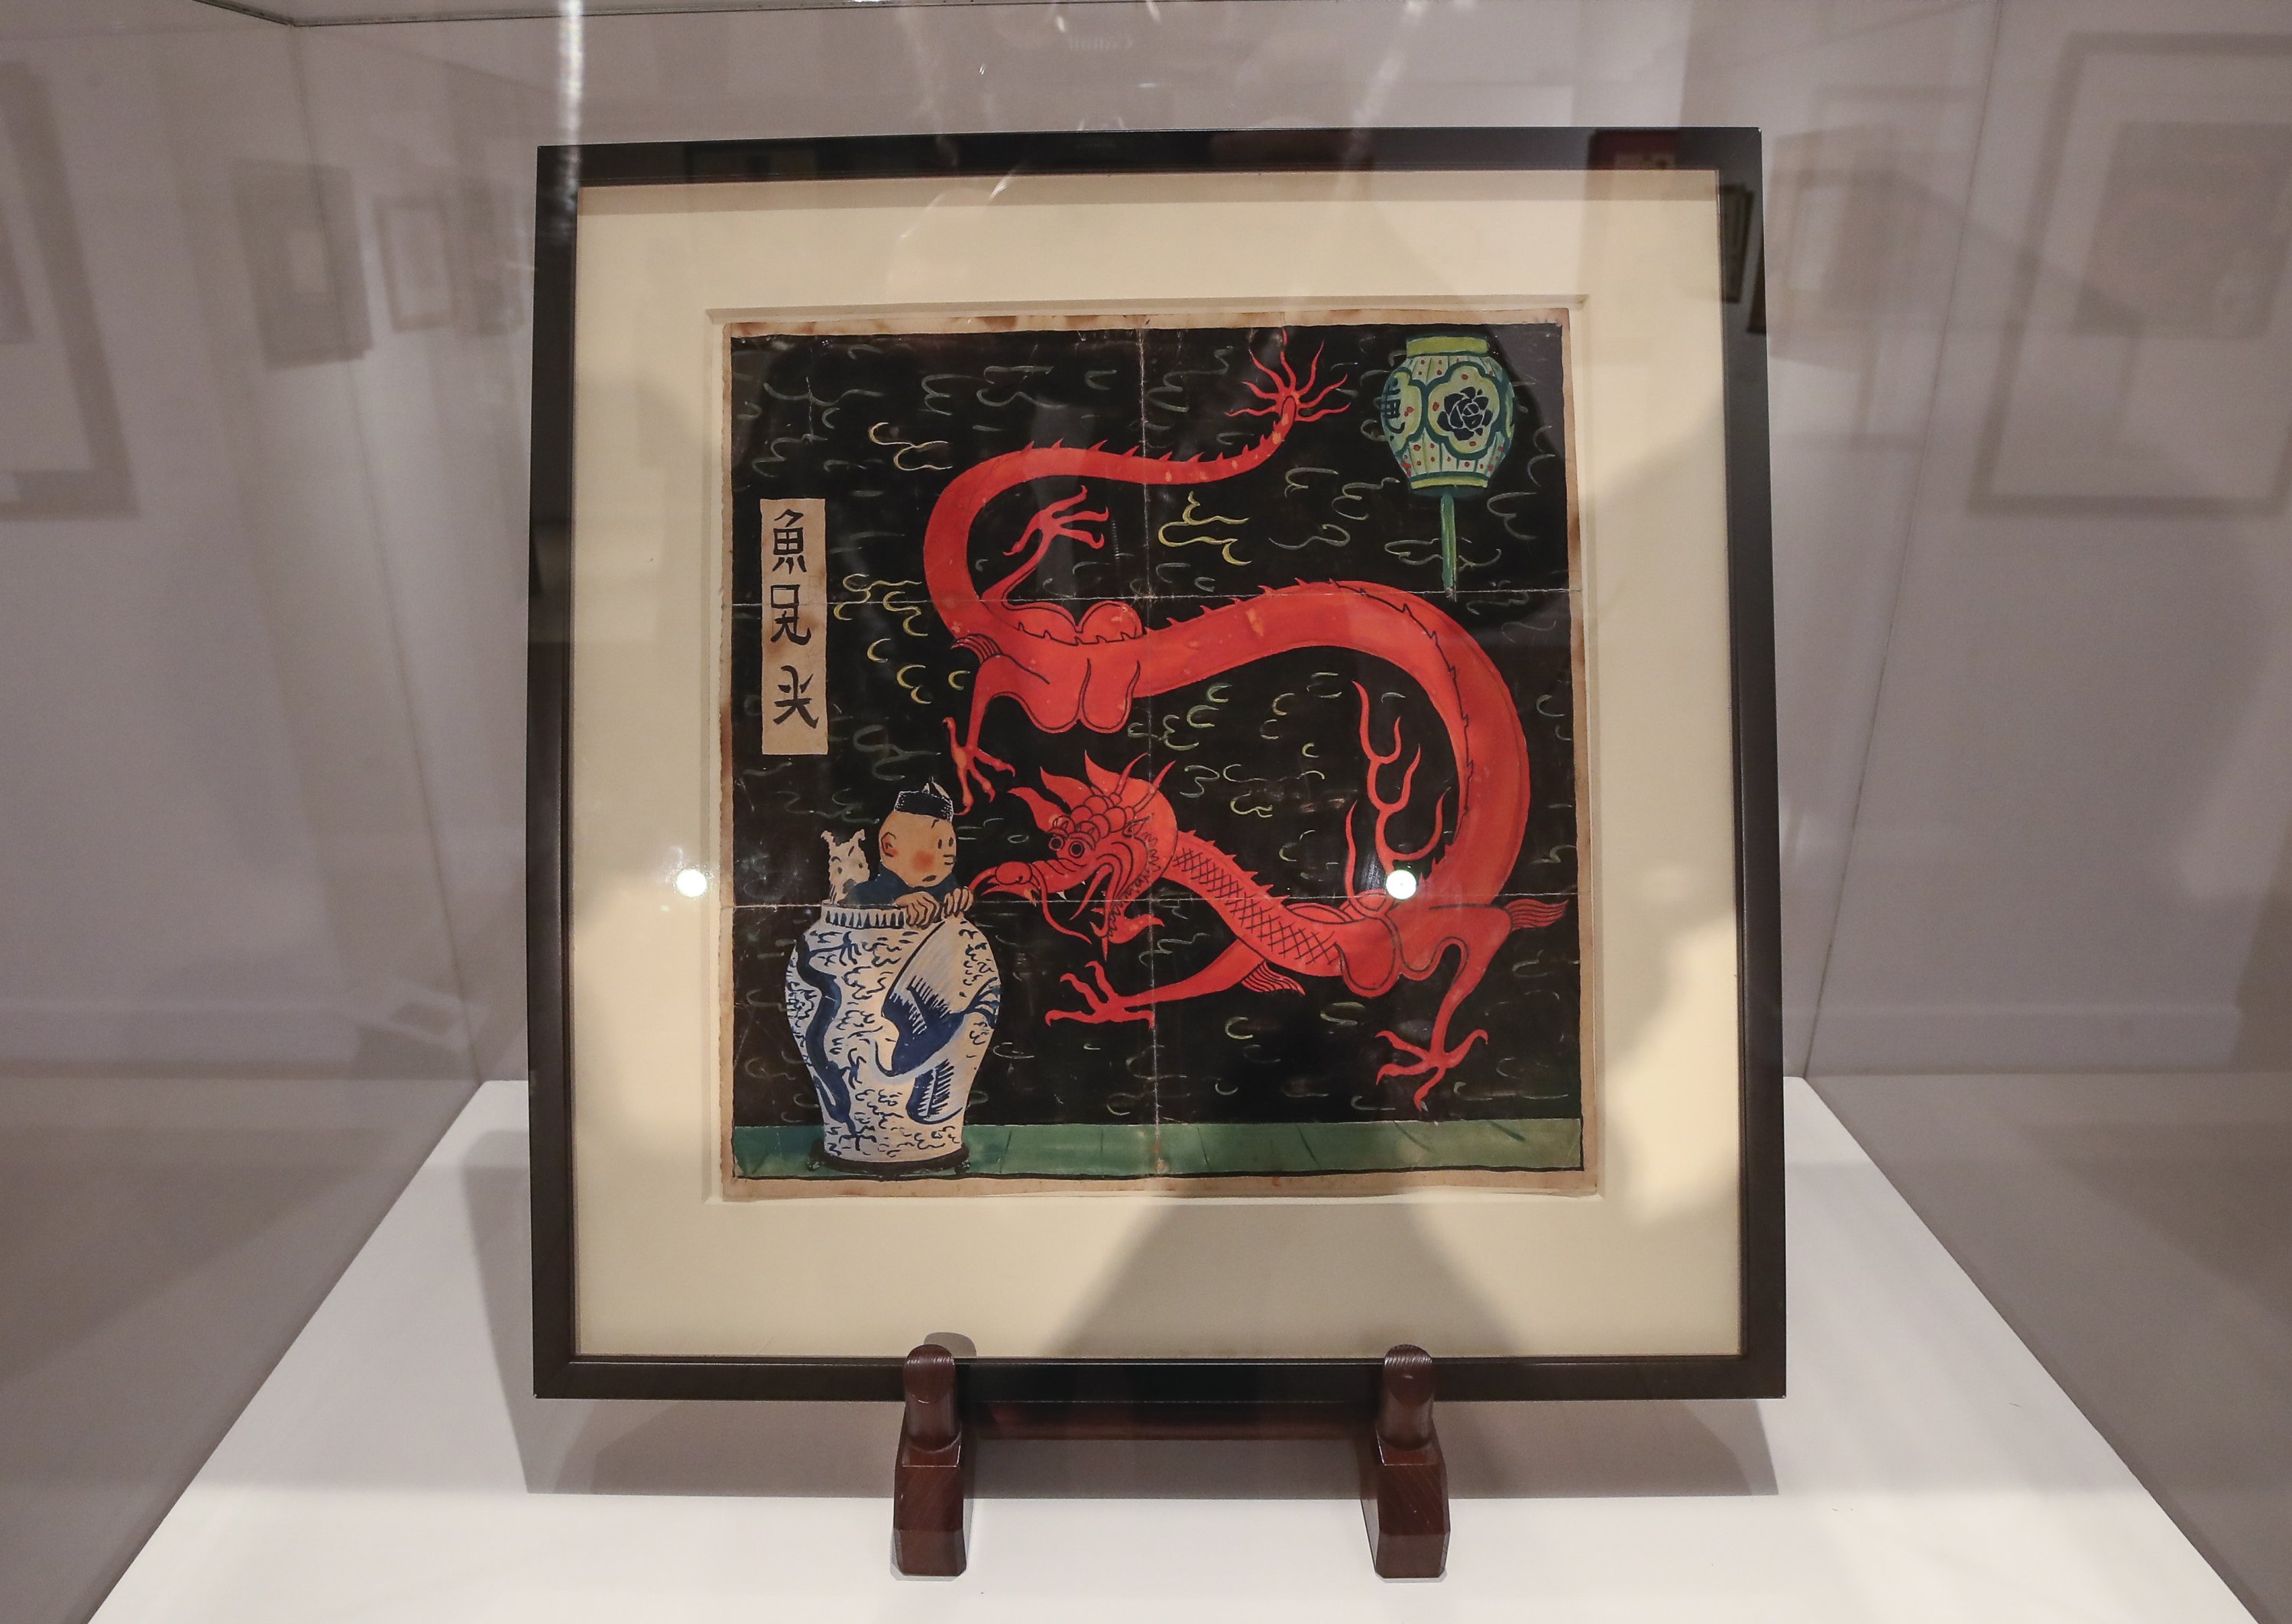 The inked and water-painted original panel of the comic character Tintin from the 1936 "The Blue Lotus" album drawn by Belgian creator Herge, is displayed at the Artcurial auction house in Paris on Jan. 13, 2021. (AP Photo)